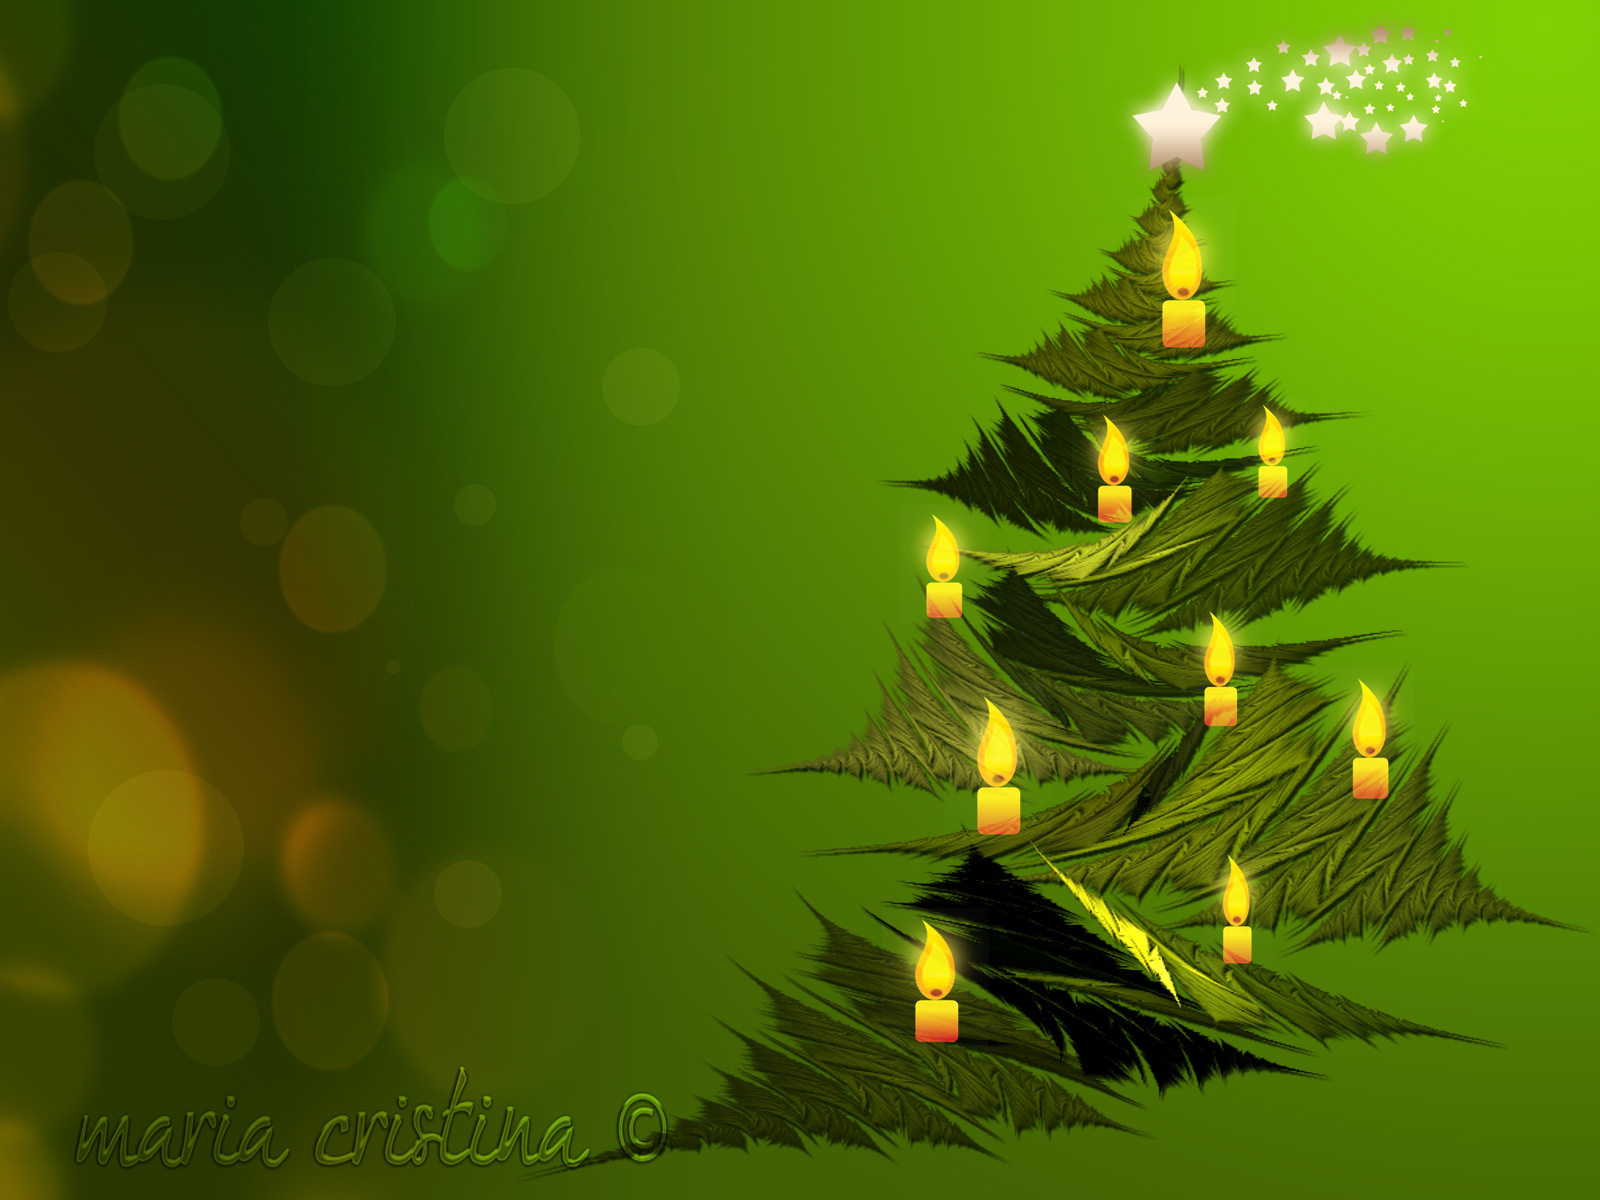 All My Pictures Wallpaper Christmas Tree